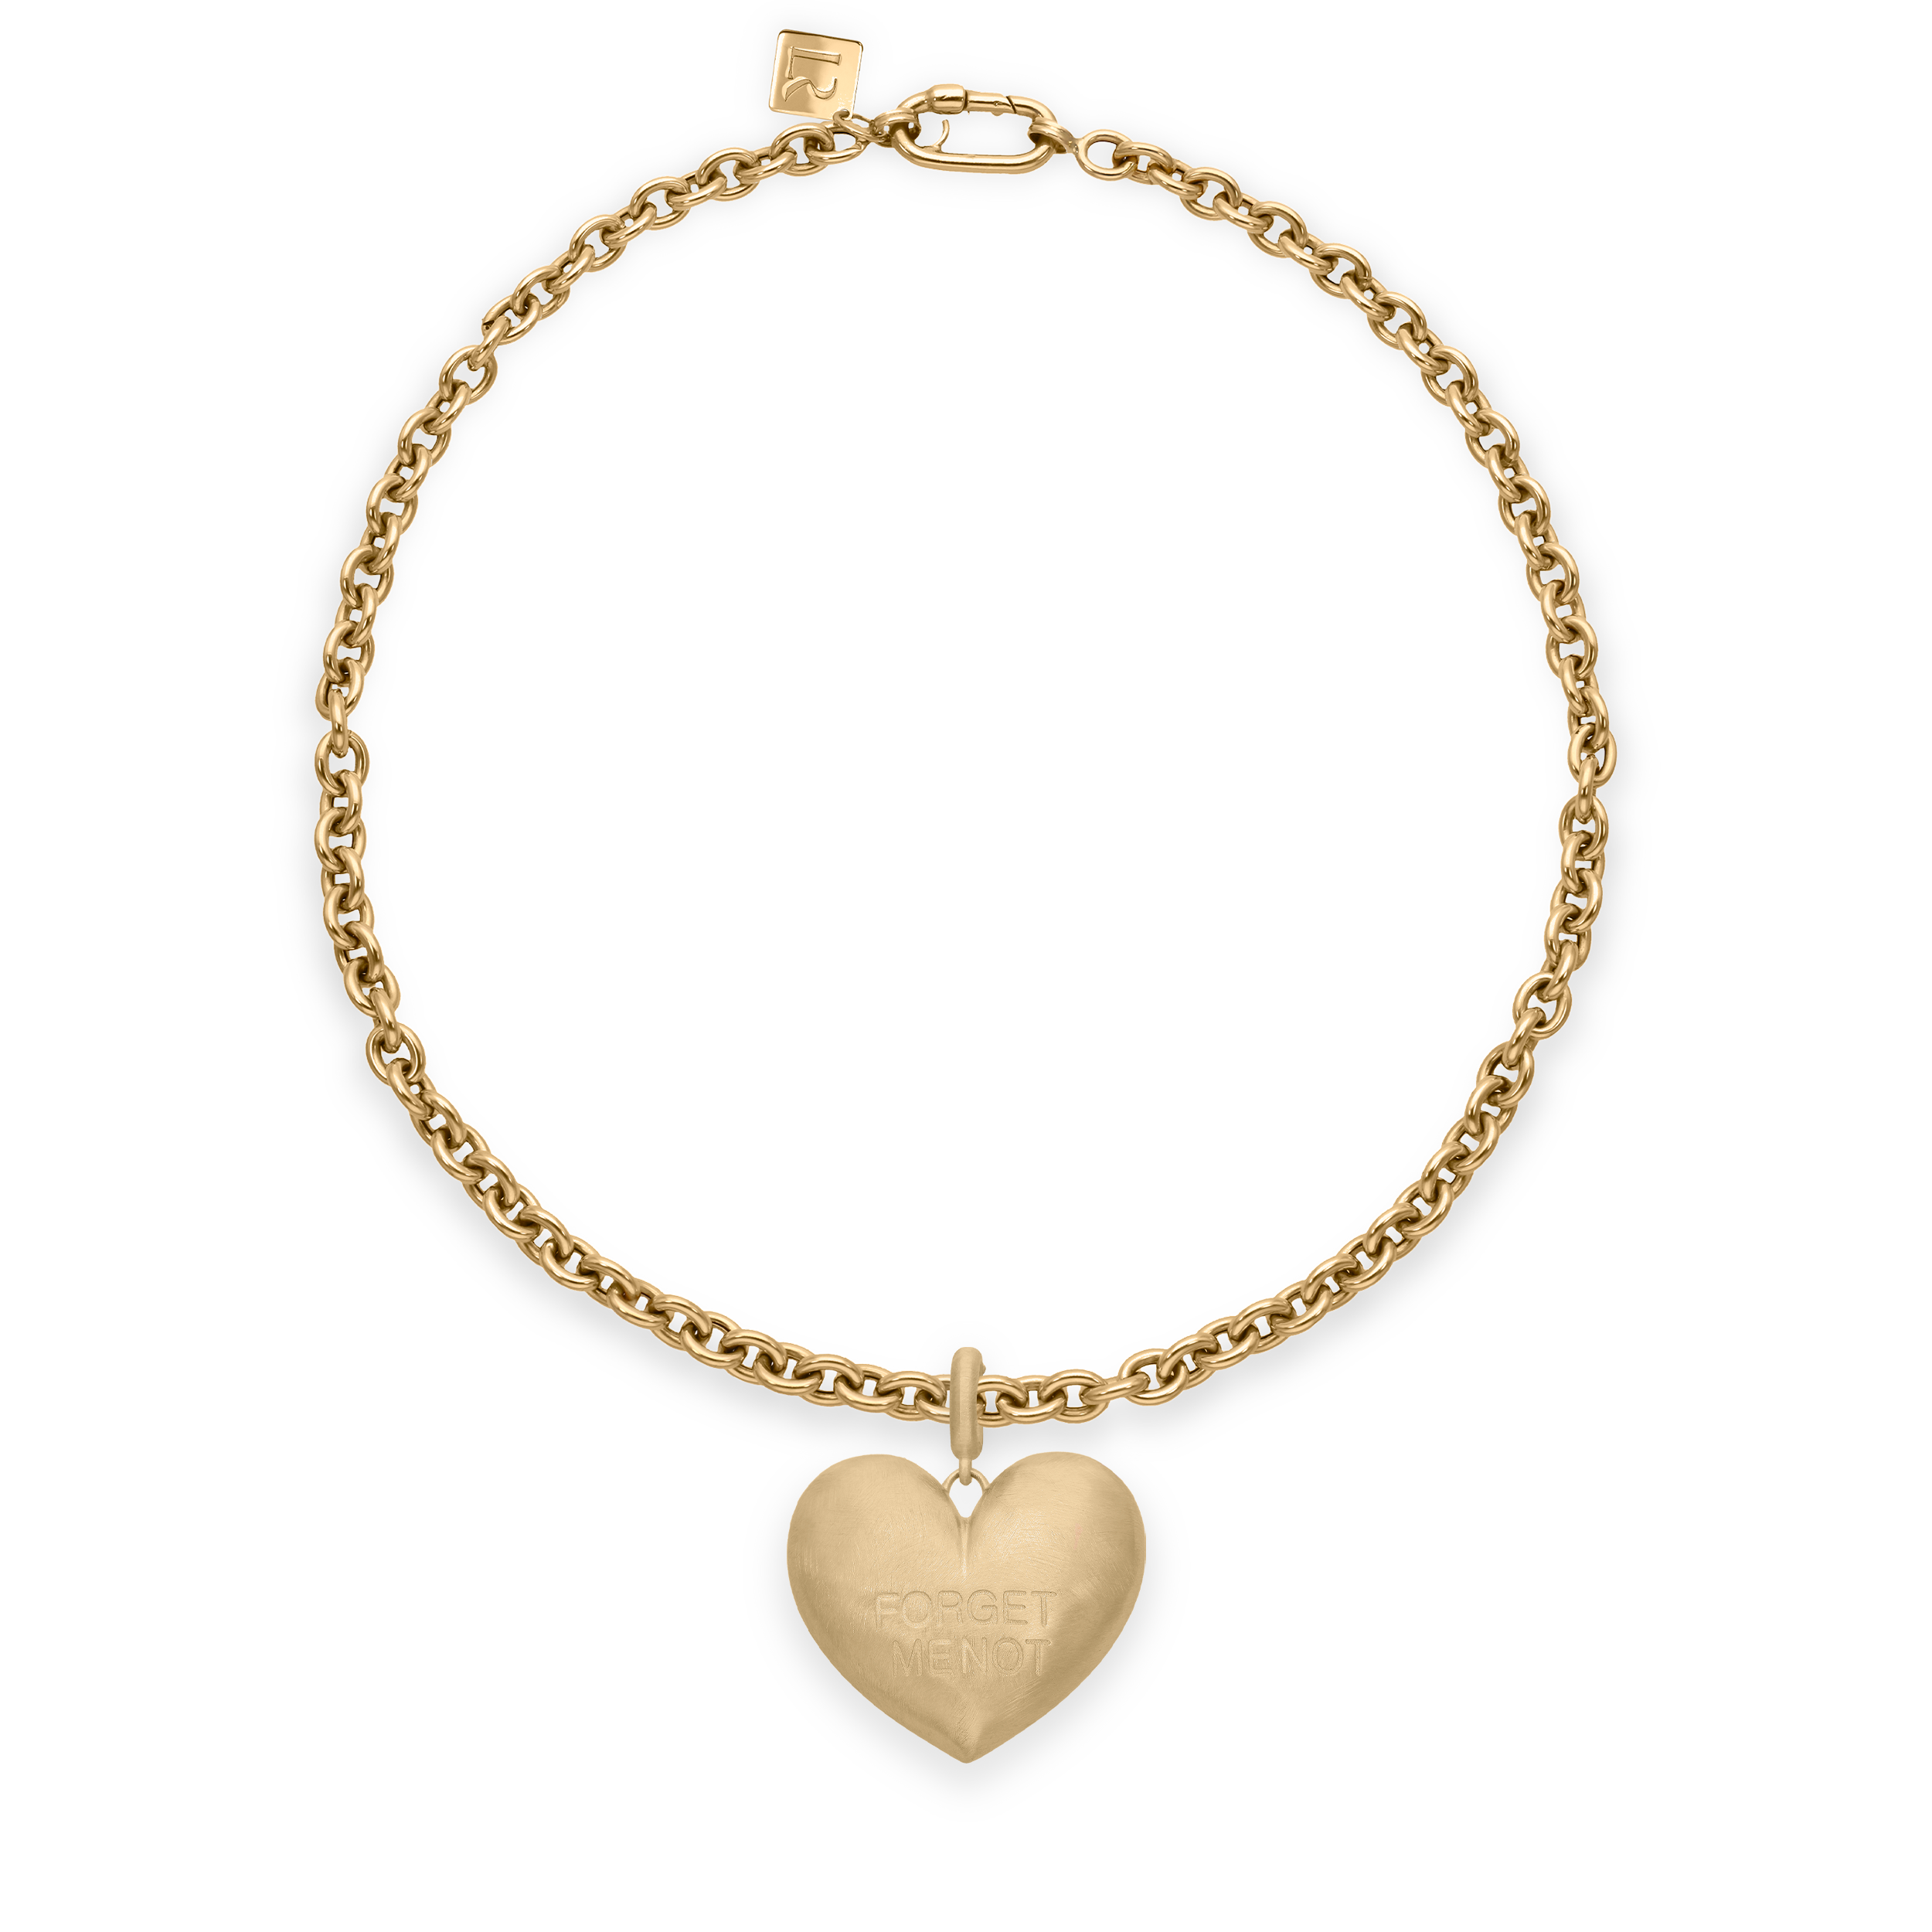 Paulette Brushed Yellow Gold "Forget Me Not" Heart Pendant on Necklace